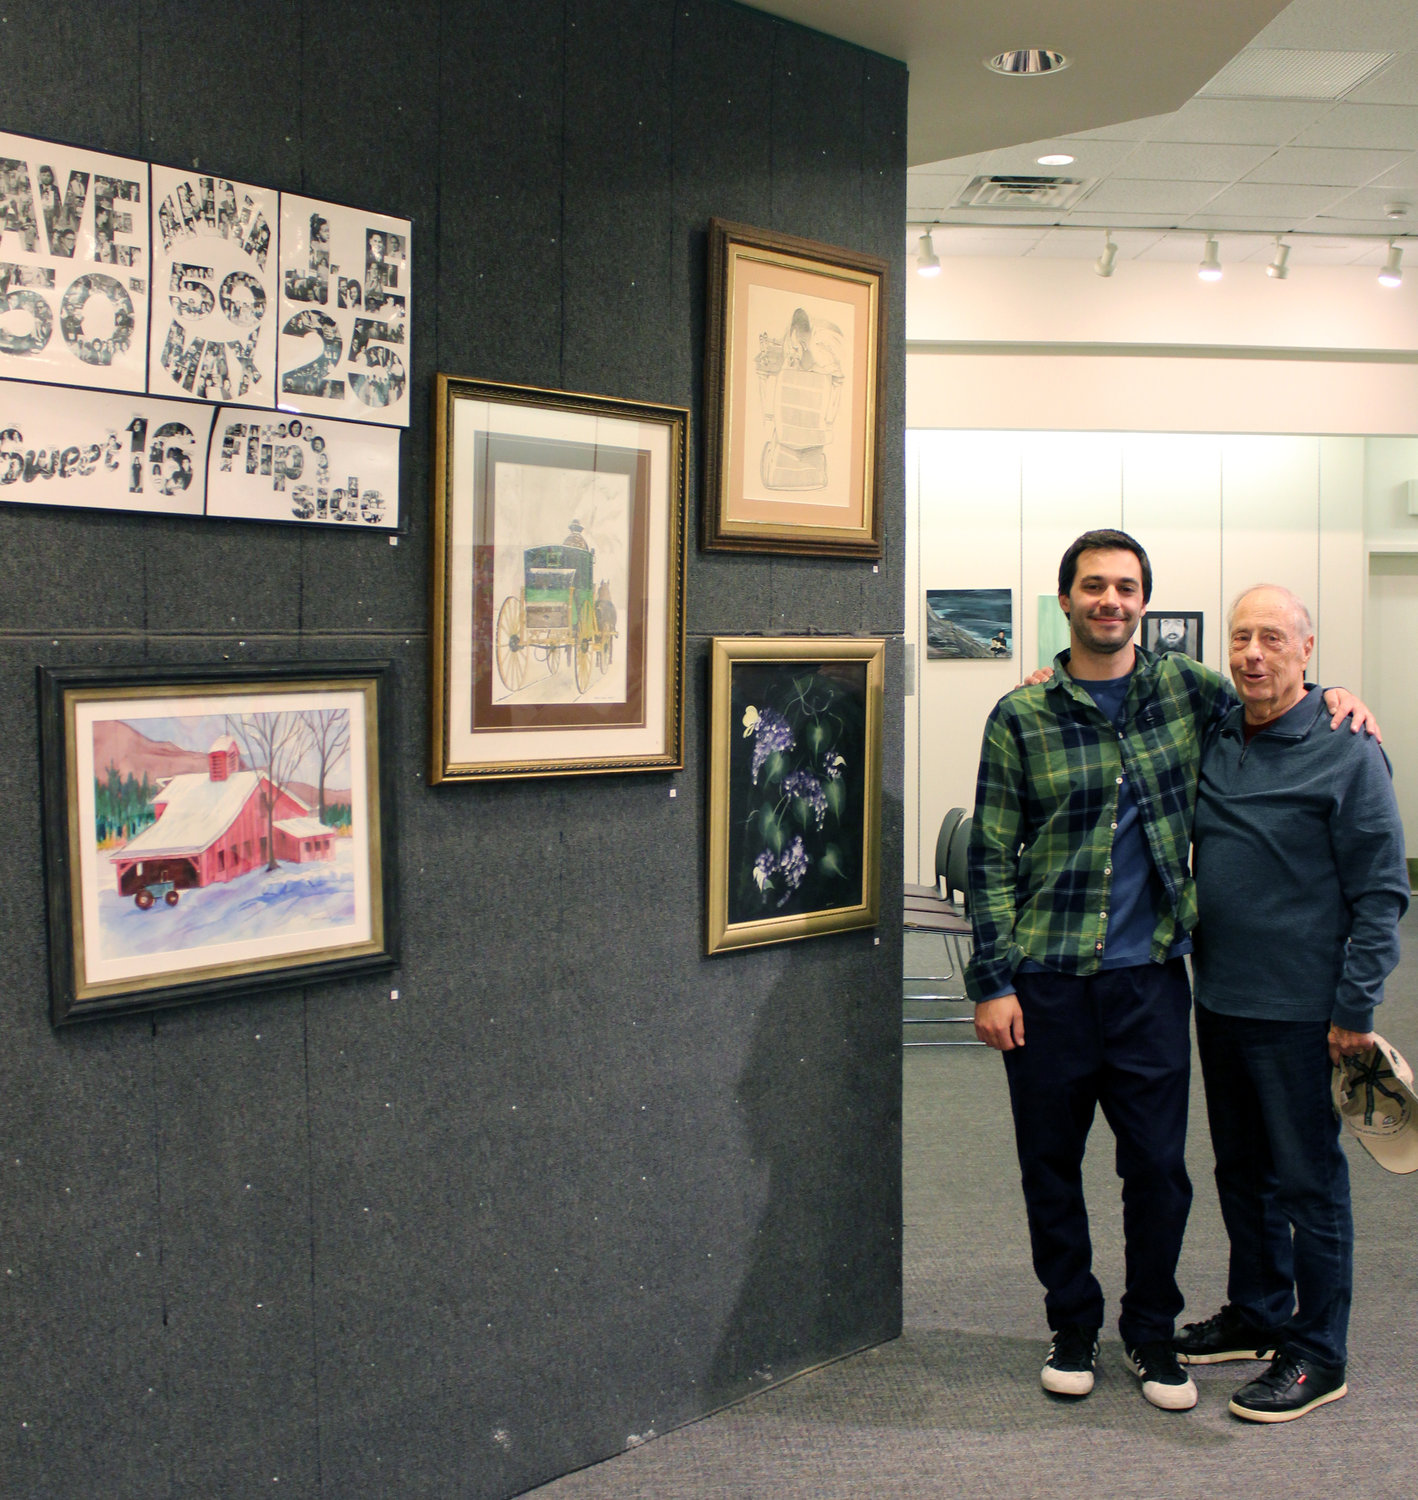 Jerry Cohen, 82, of East Meadow, showcased his art at the East Meadow Public Library’s annual Invitational Art Show last Sunday at the Samanea New York Market, the former Source Mall, in Westbury. He was with Charlie Fosso, 27, of Levittown, who organized the show.